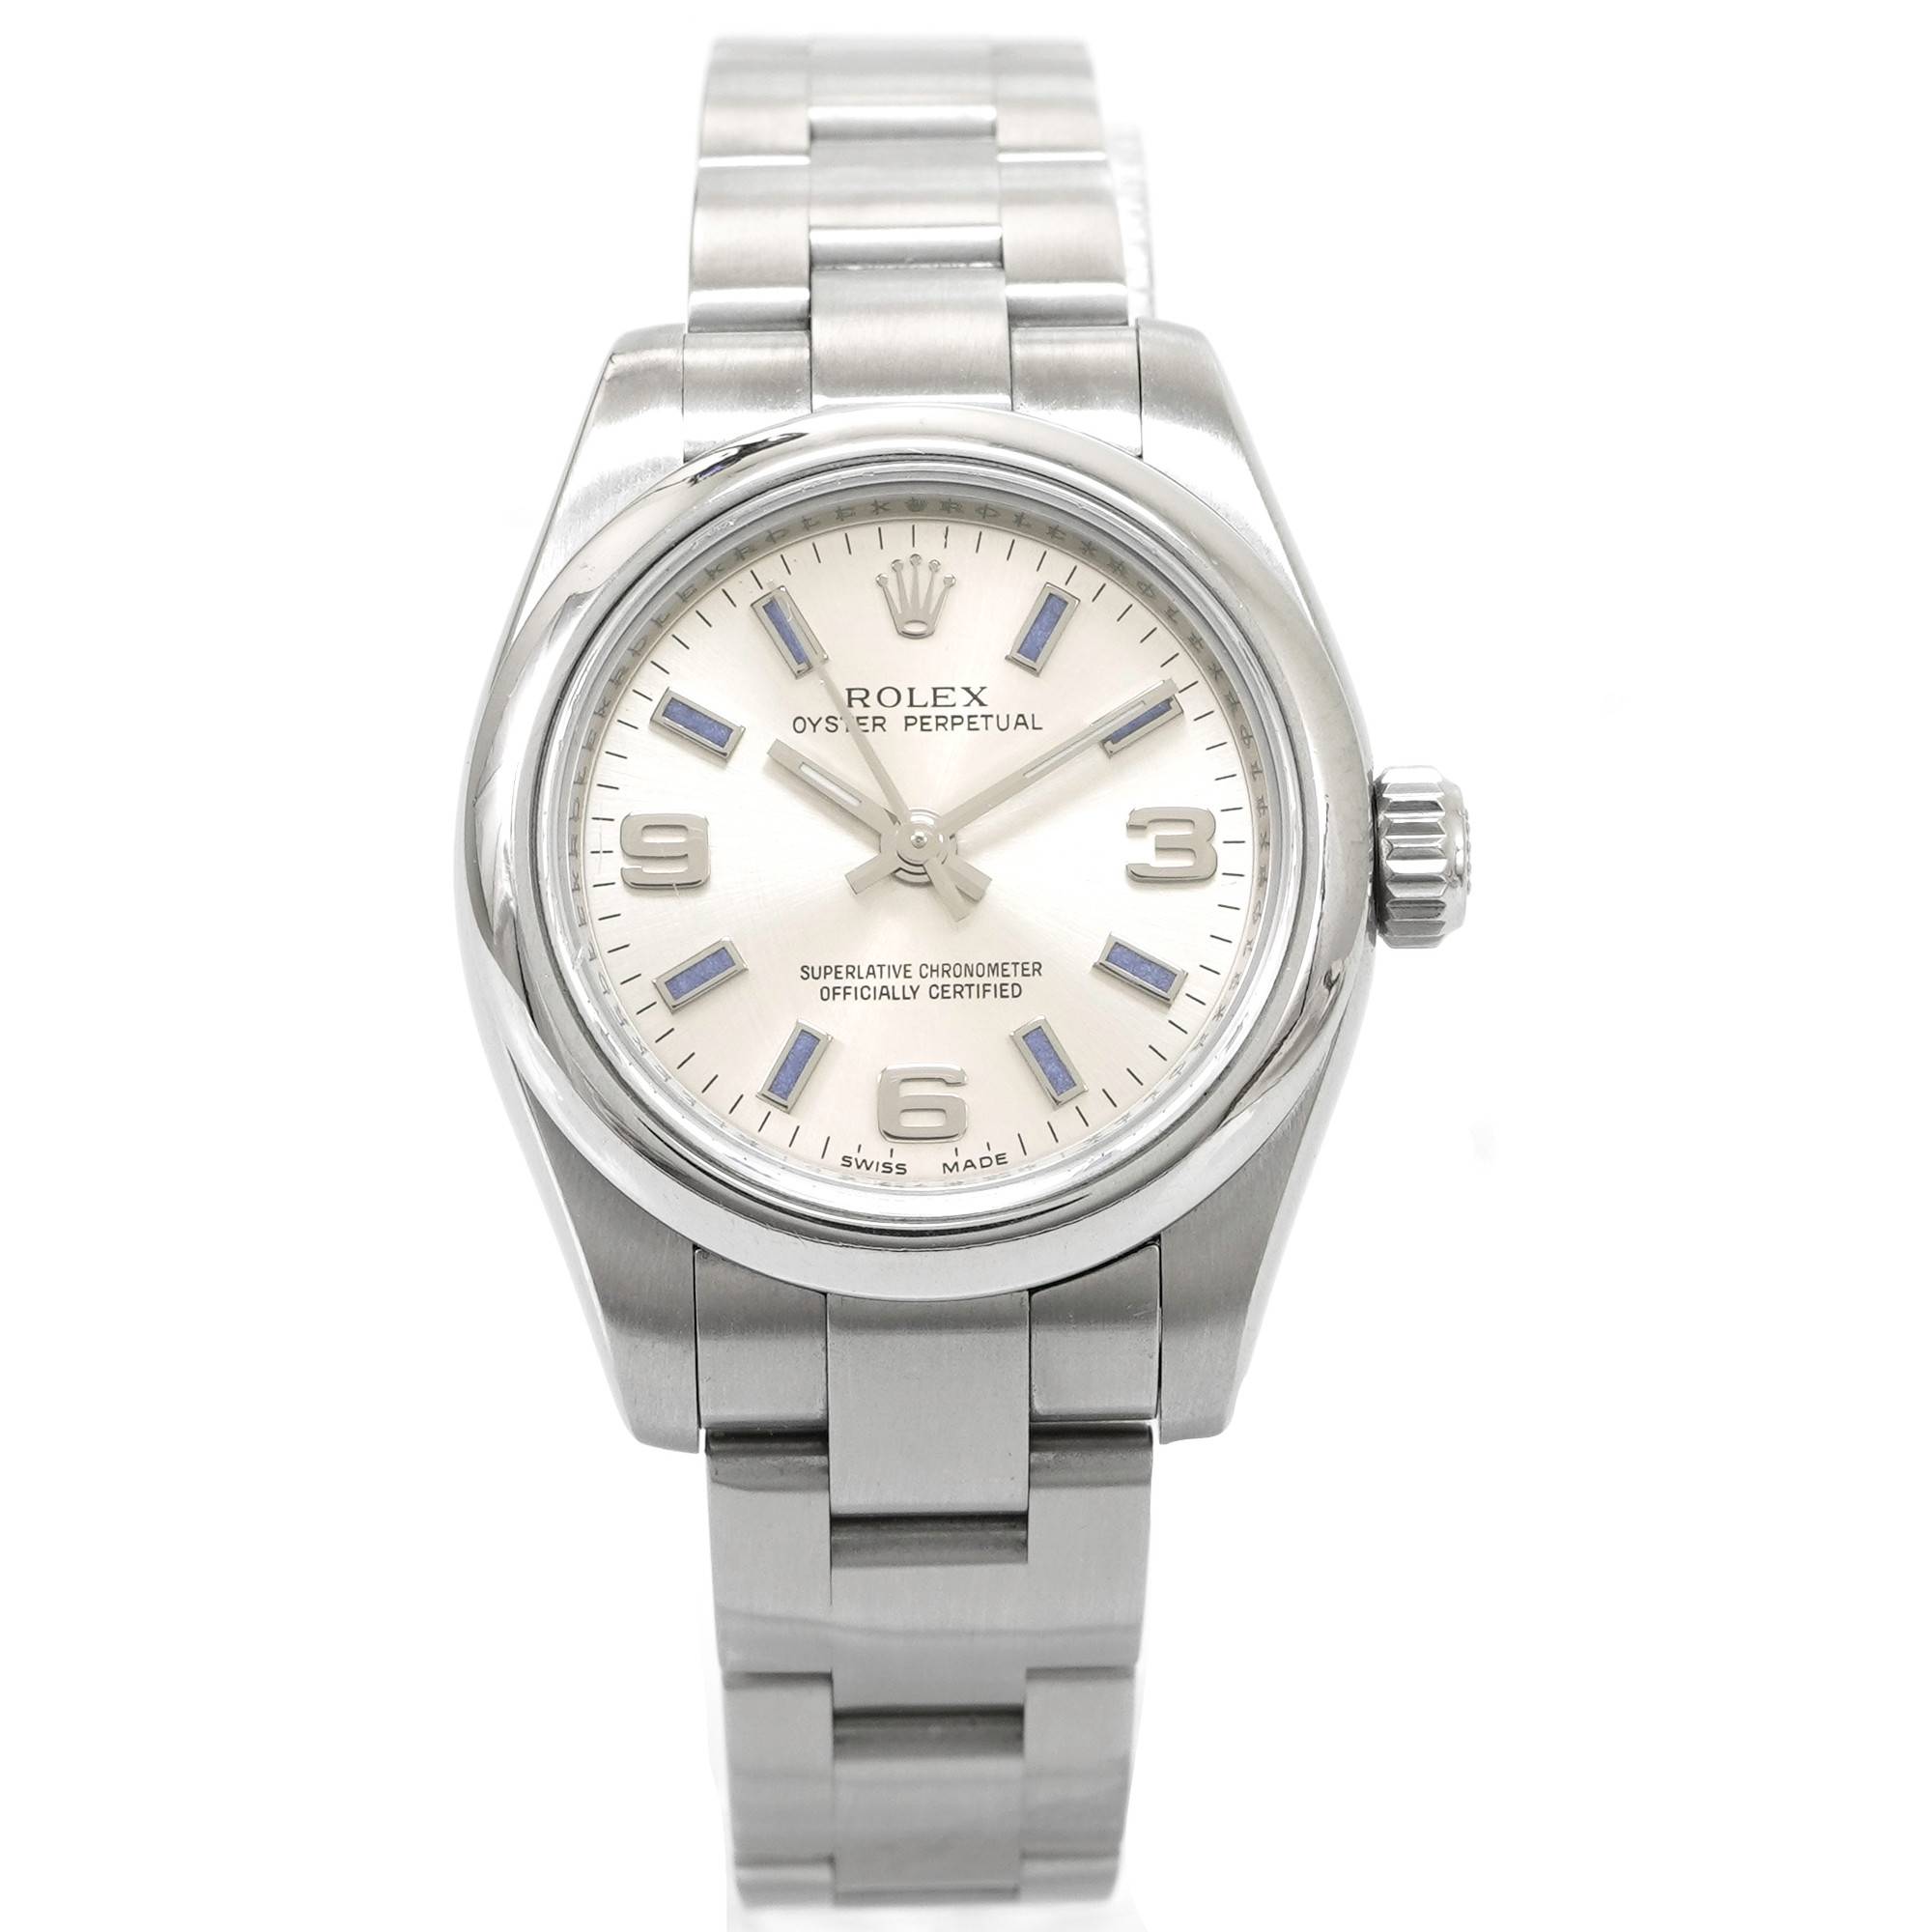 Rolex Oyster Perpetual 176200 26mm - Inventory 5012